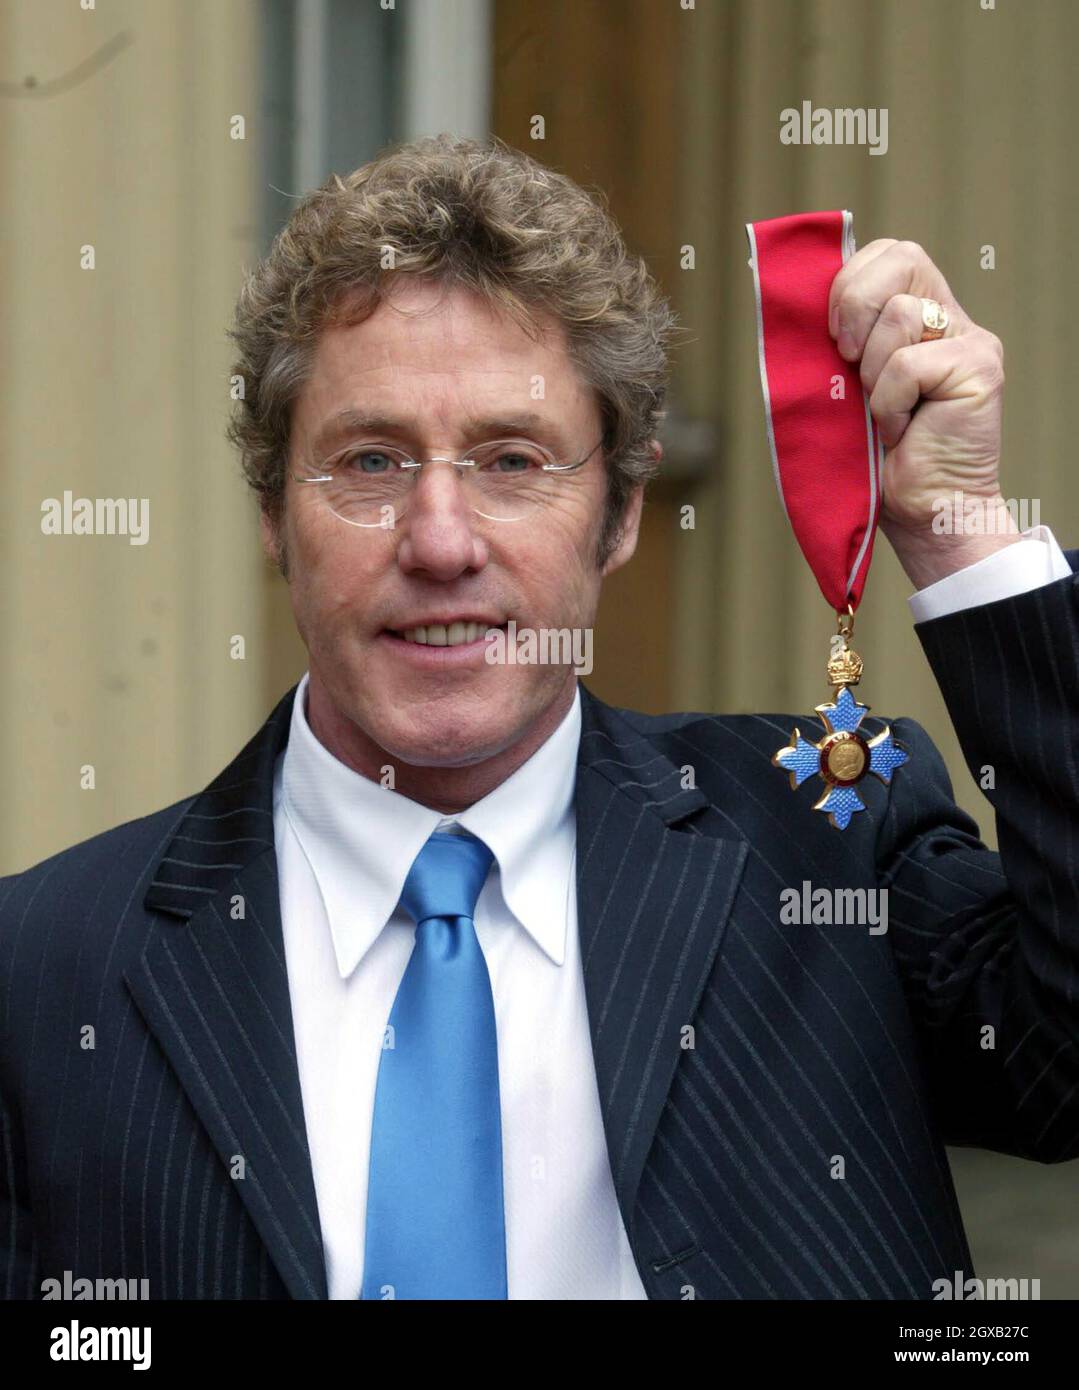 Roger Daltrey from the The Who in the courtyard of Buckingham Palace in central London, Wednesday February 9, 2005. The singer had just been honoured as a Commander of the British Empire (CBE) for services to music. Anwar Hussein/allactiondigital.com   Stock Photo